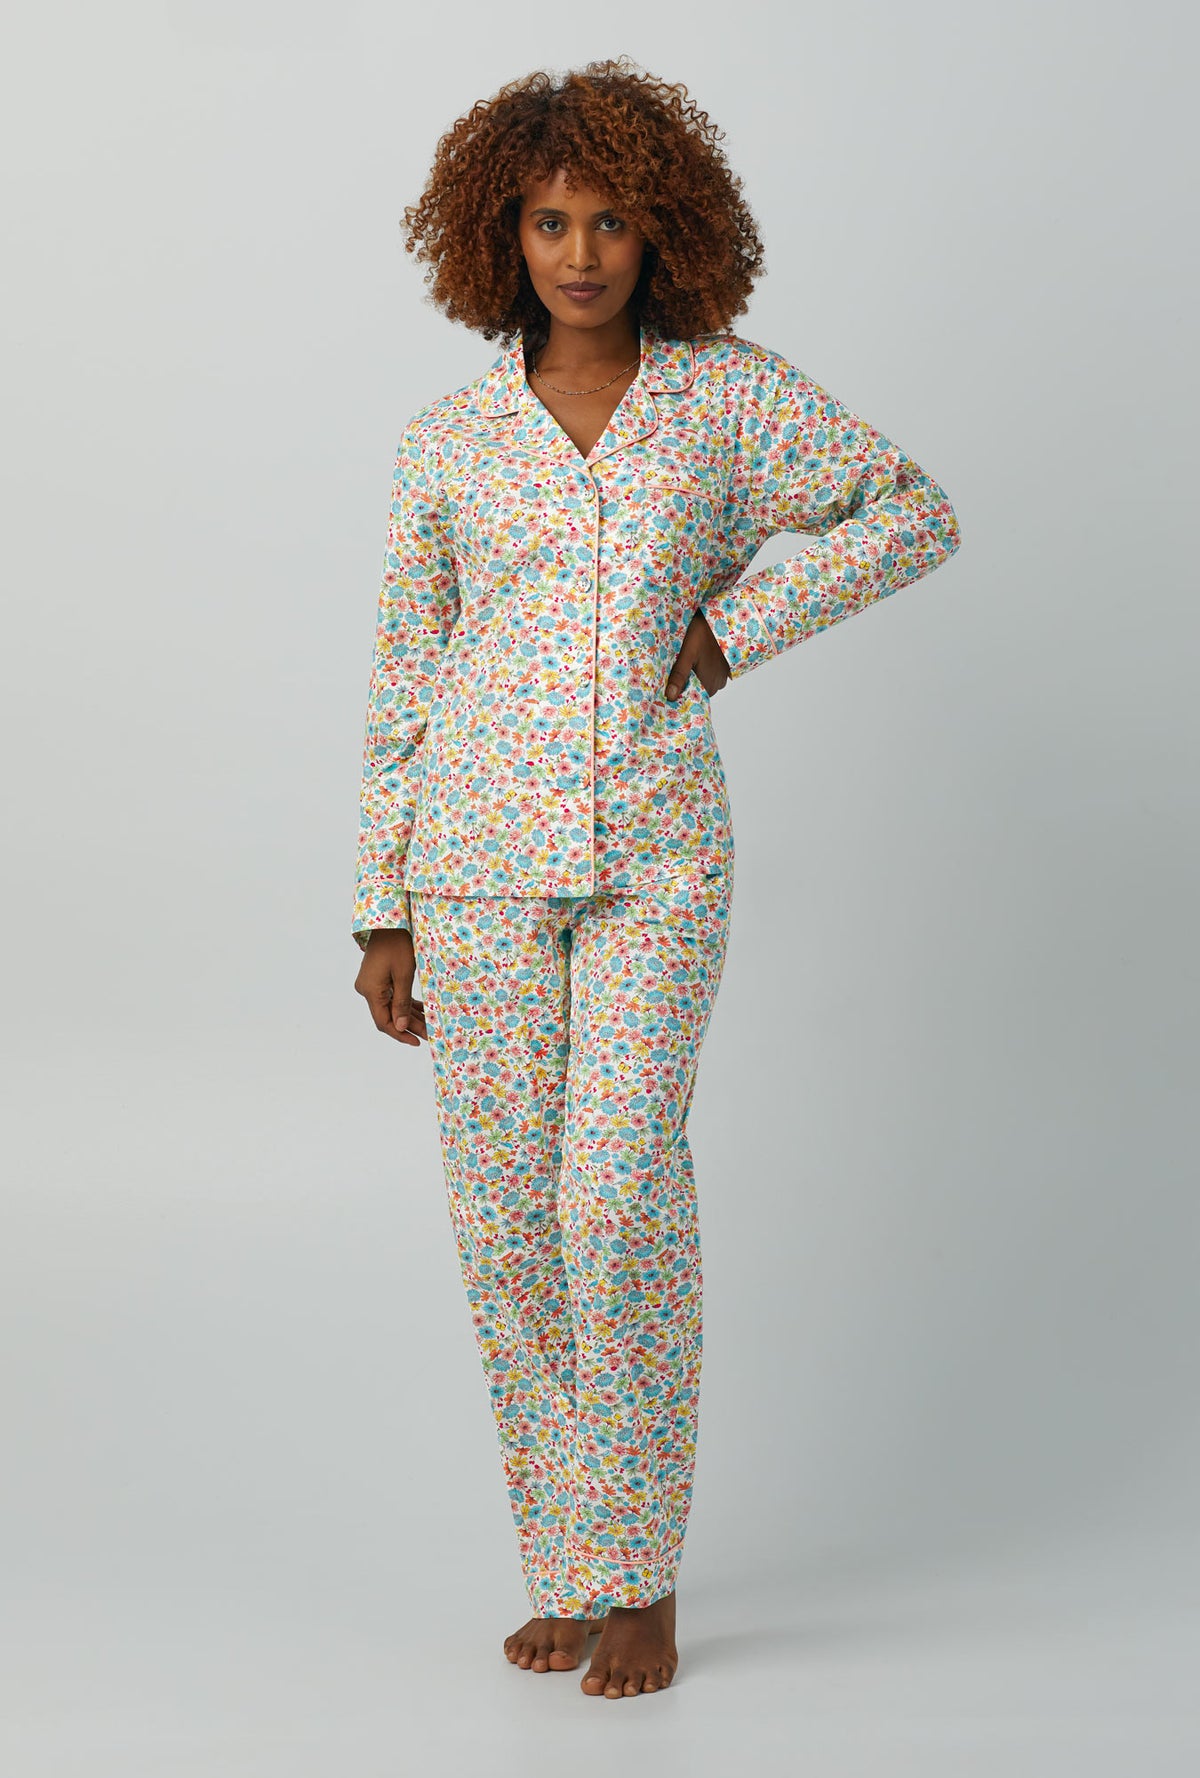 A lady wearing Long Sleeve Classic Woven Cotton Poplin PJ Set with spring time floral print